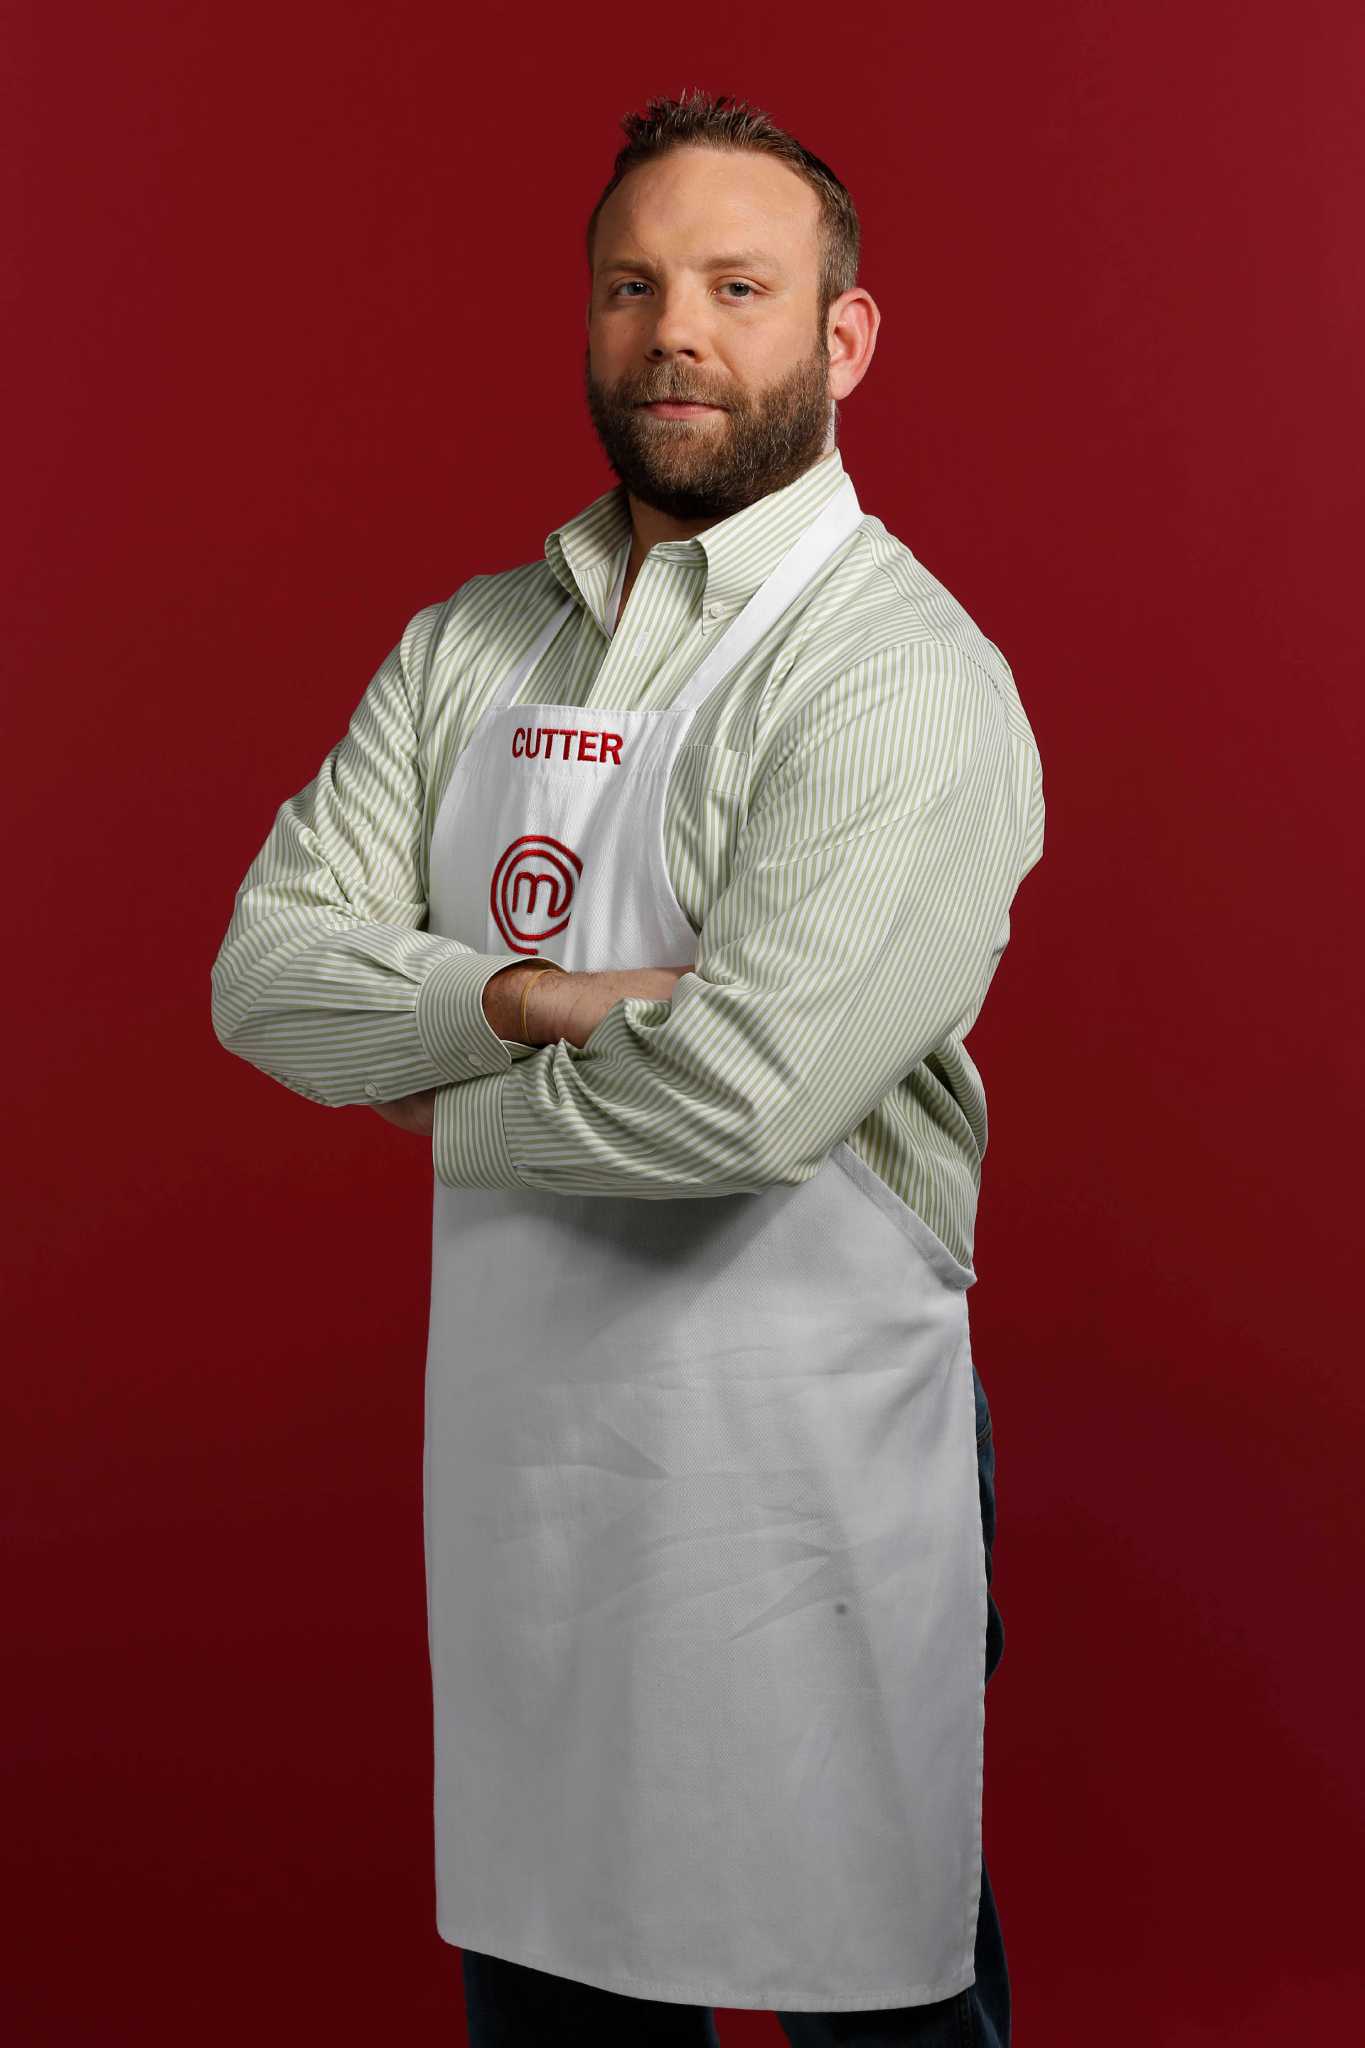 Beaumont's Cutter Brewer eliminated from 'MasterChef.